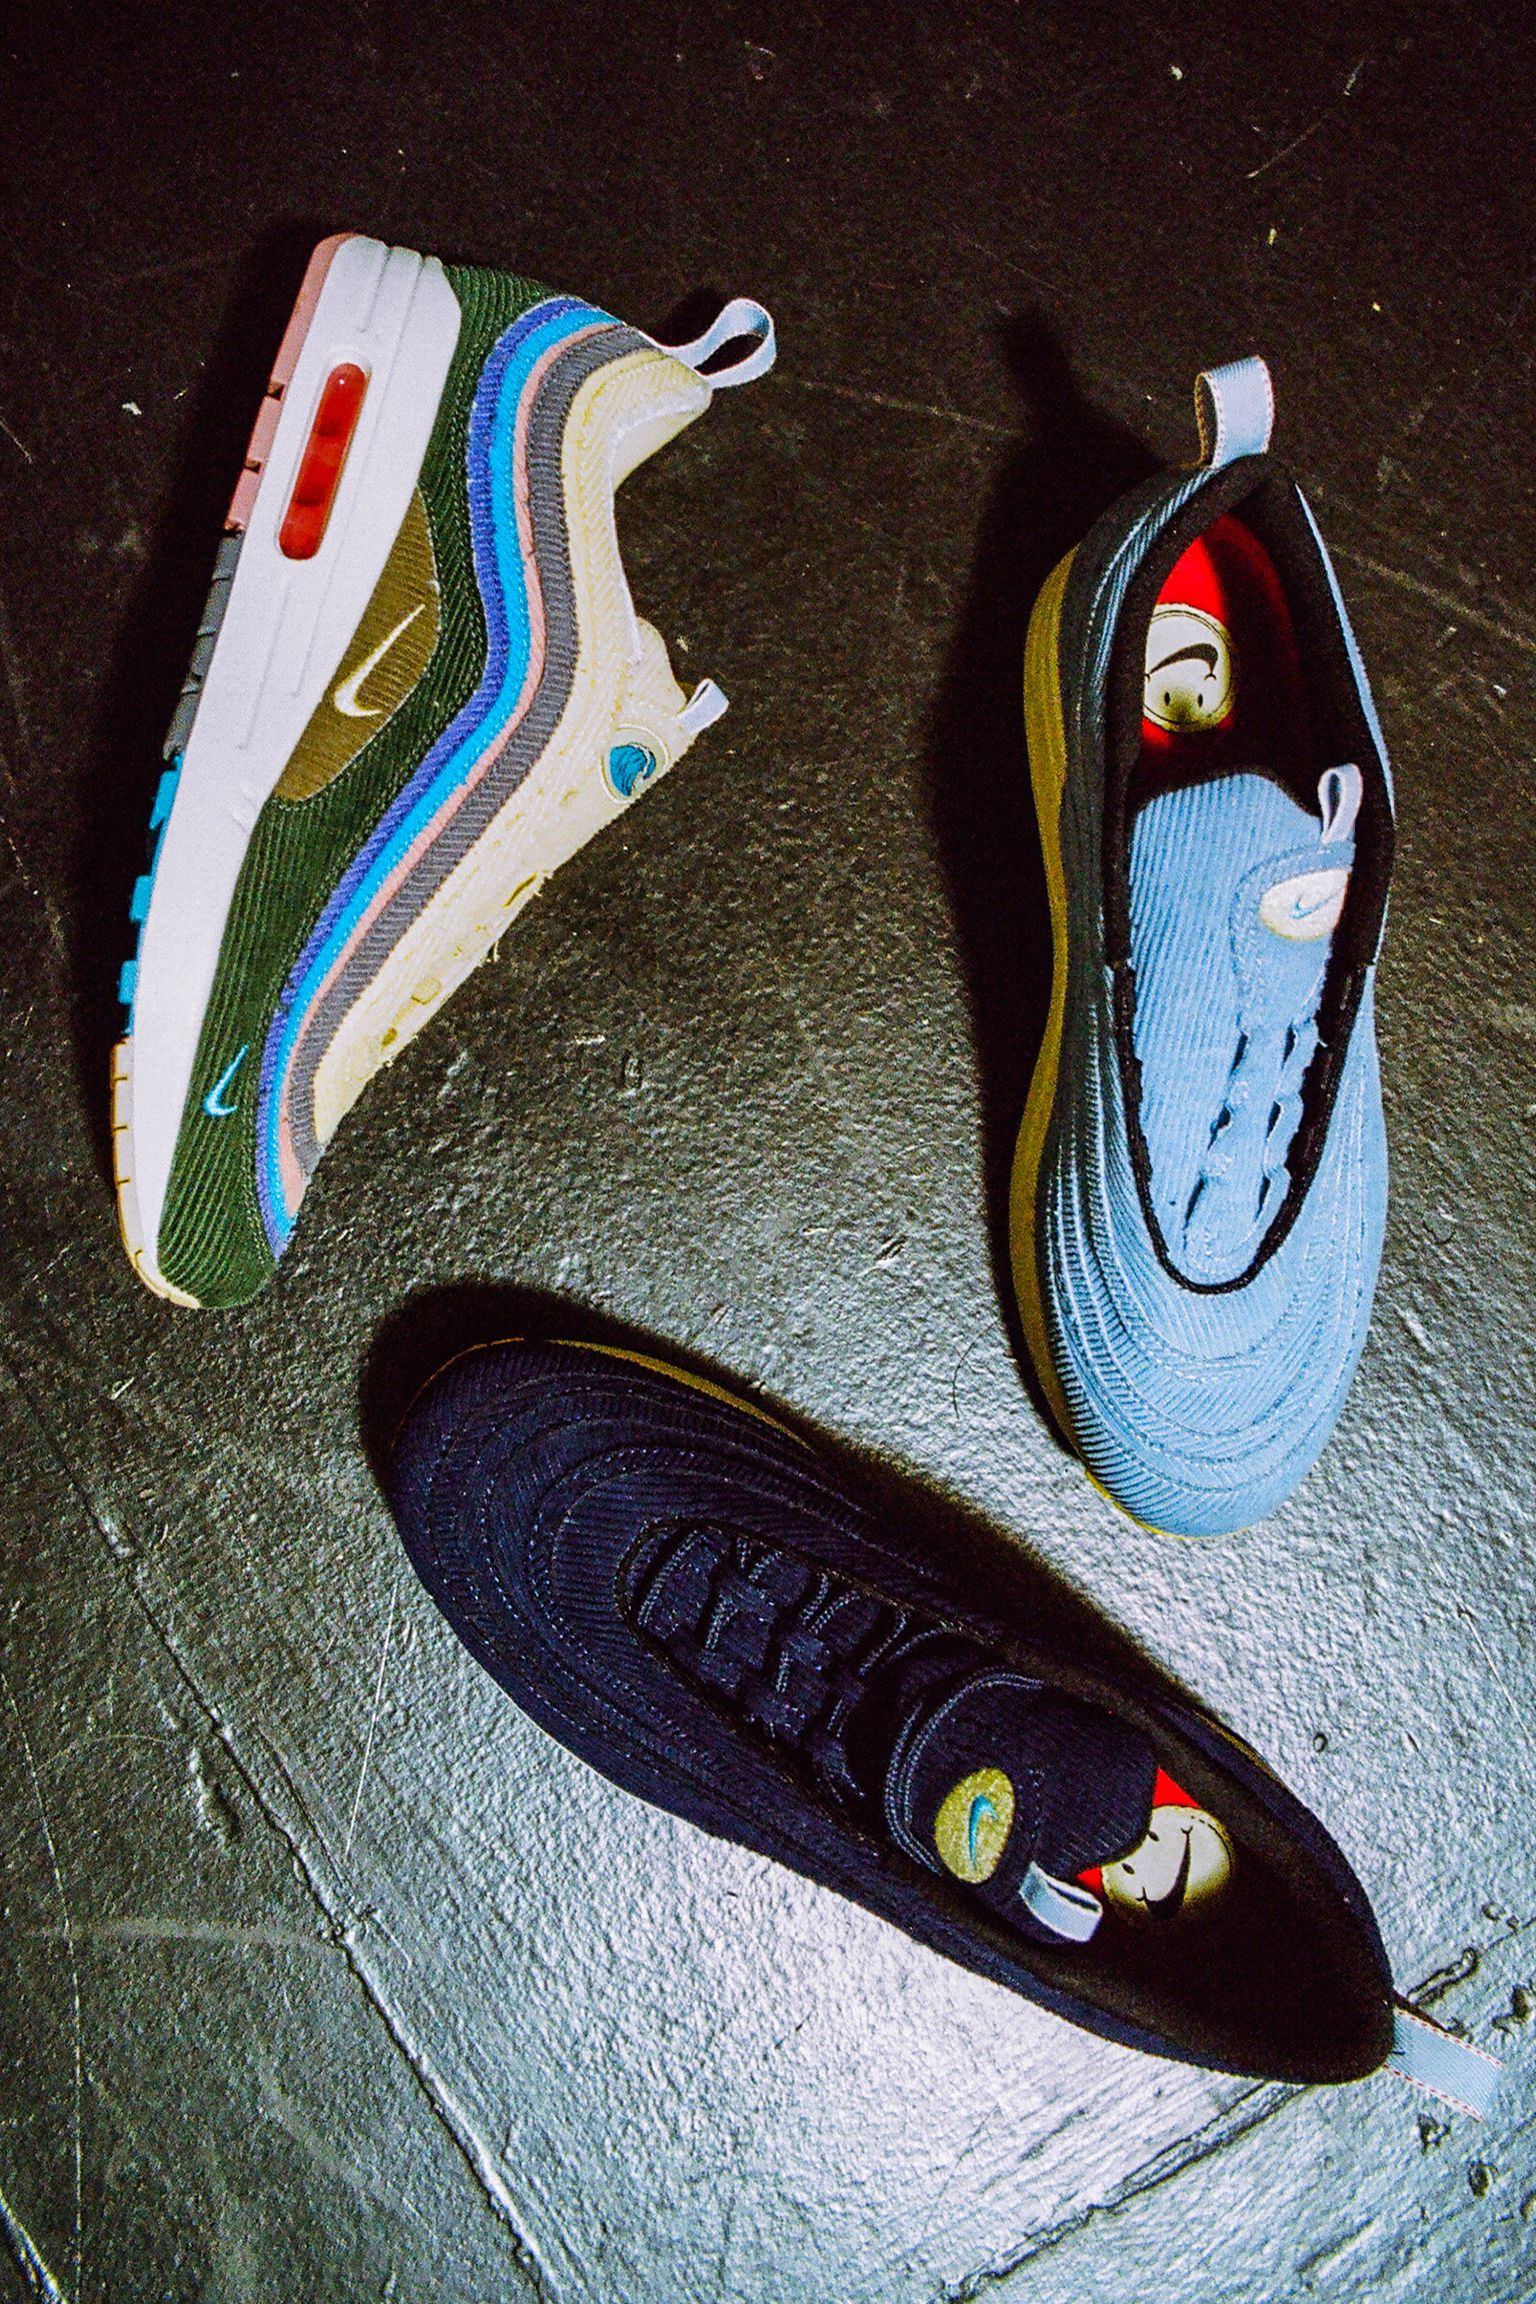 Air Max 1/97 Sean Wotherspoon. Nike SNKRS